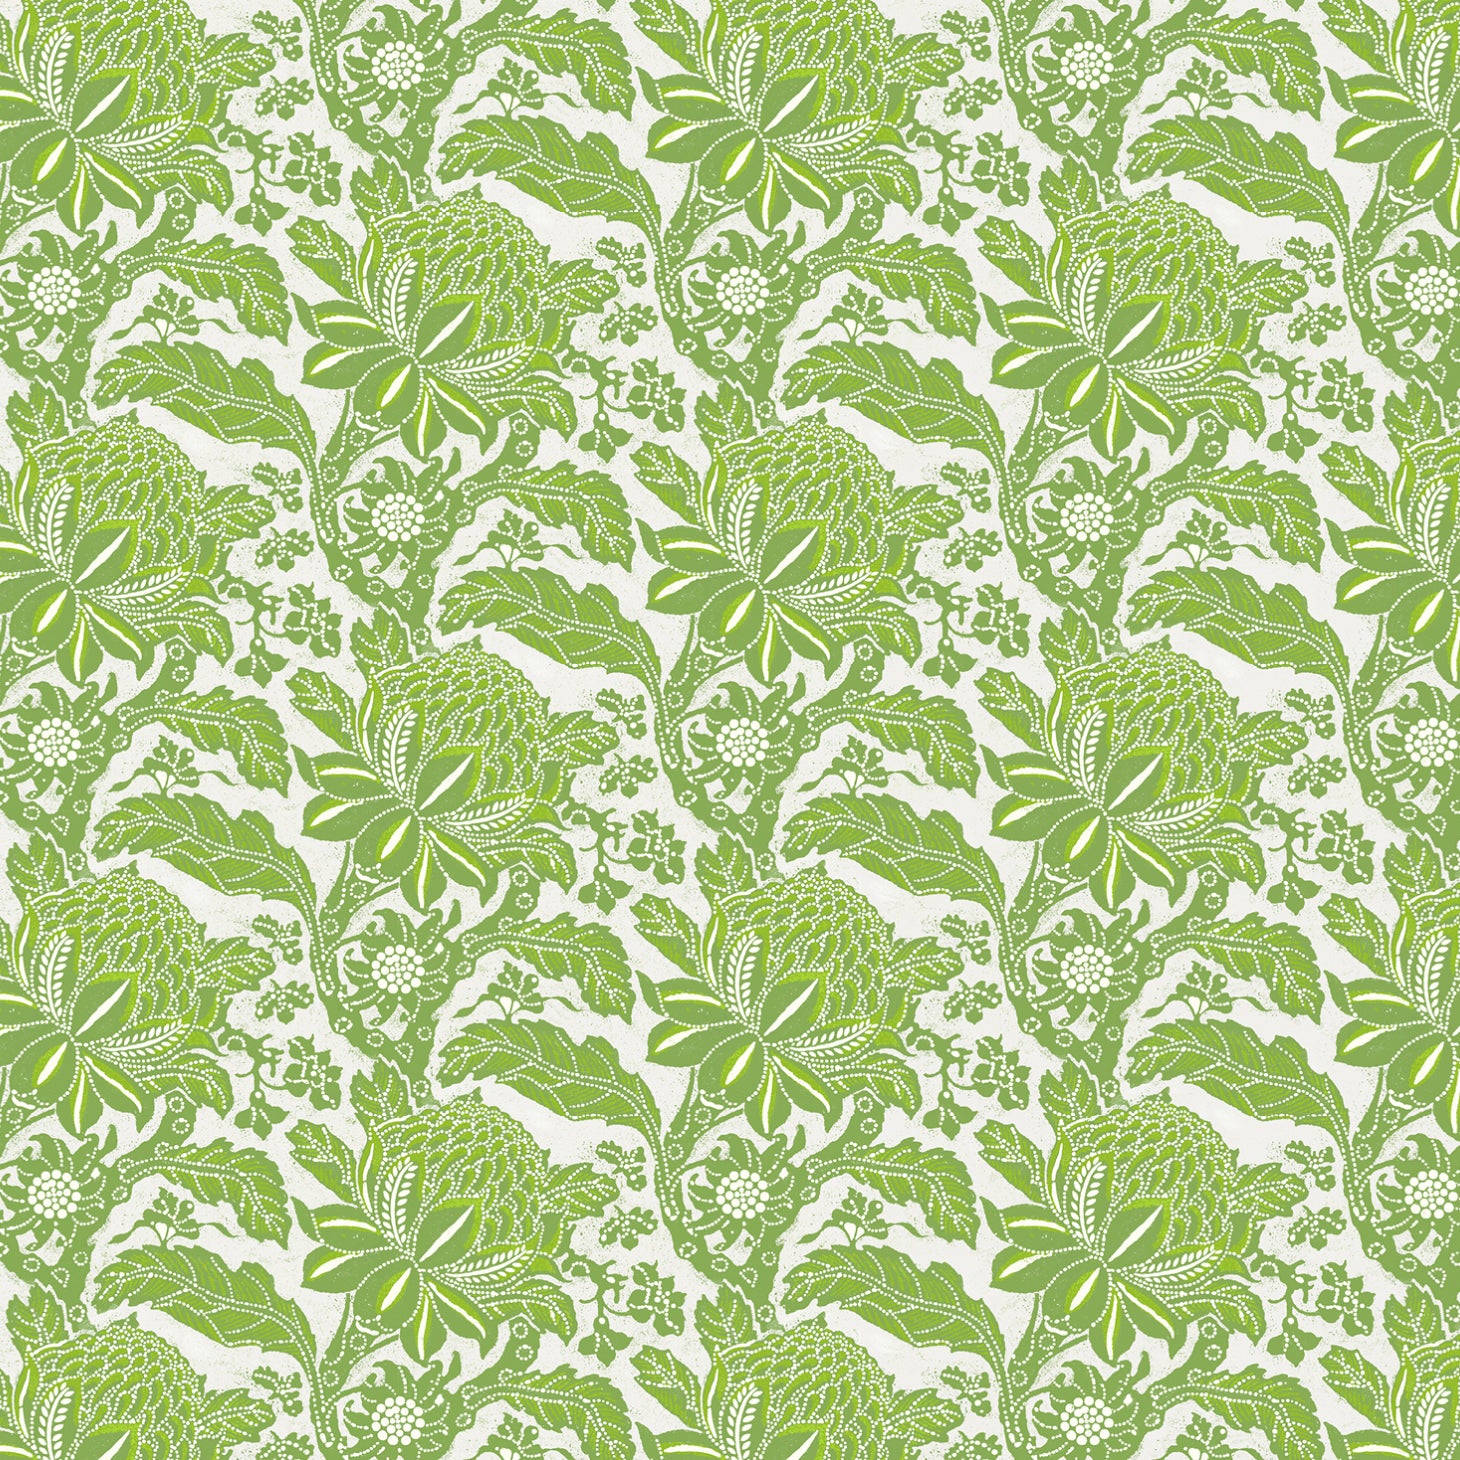 Detail of wallpaper in a repeating botanical print in green on a white field.